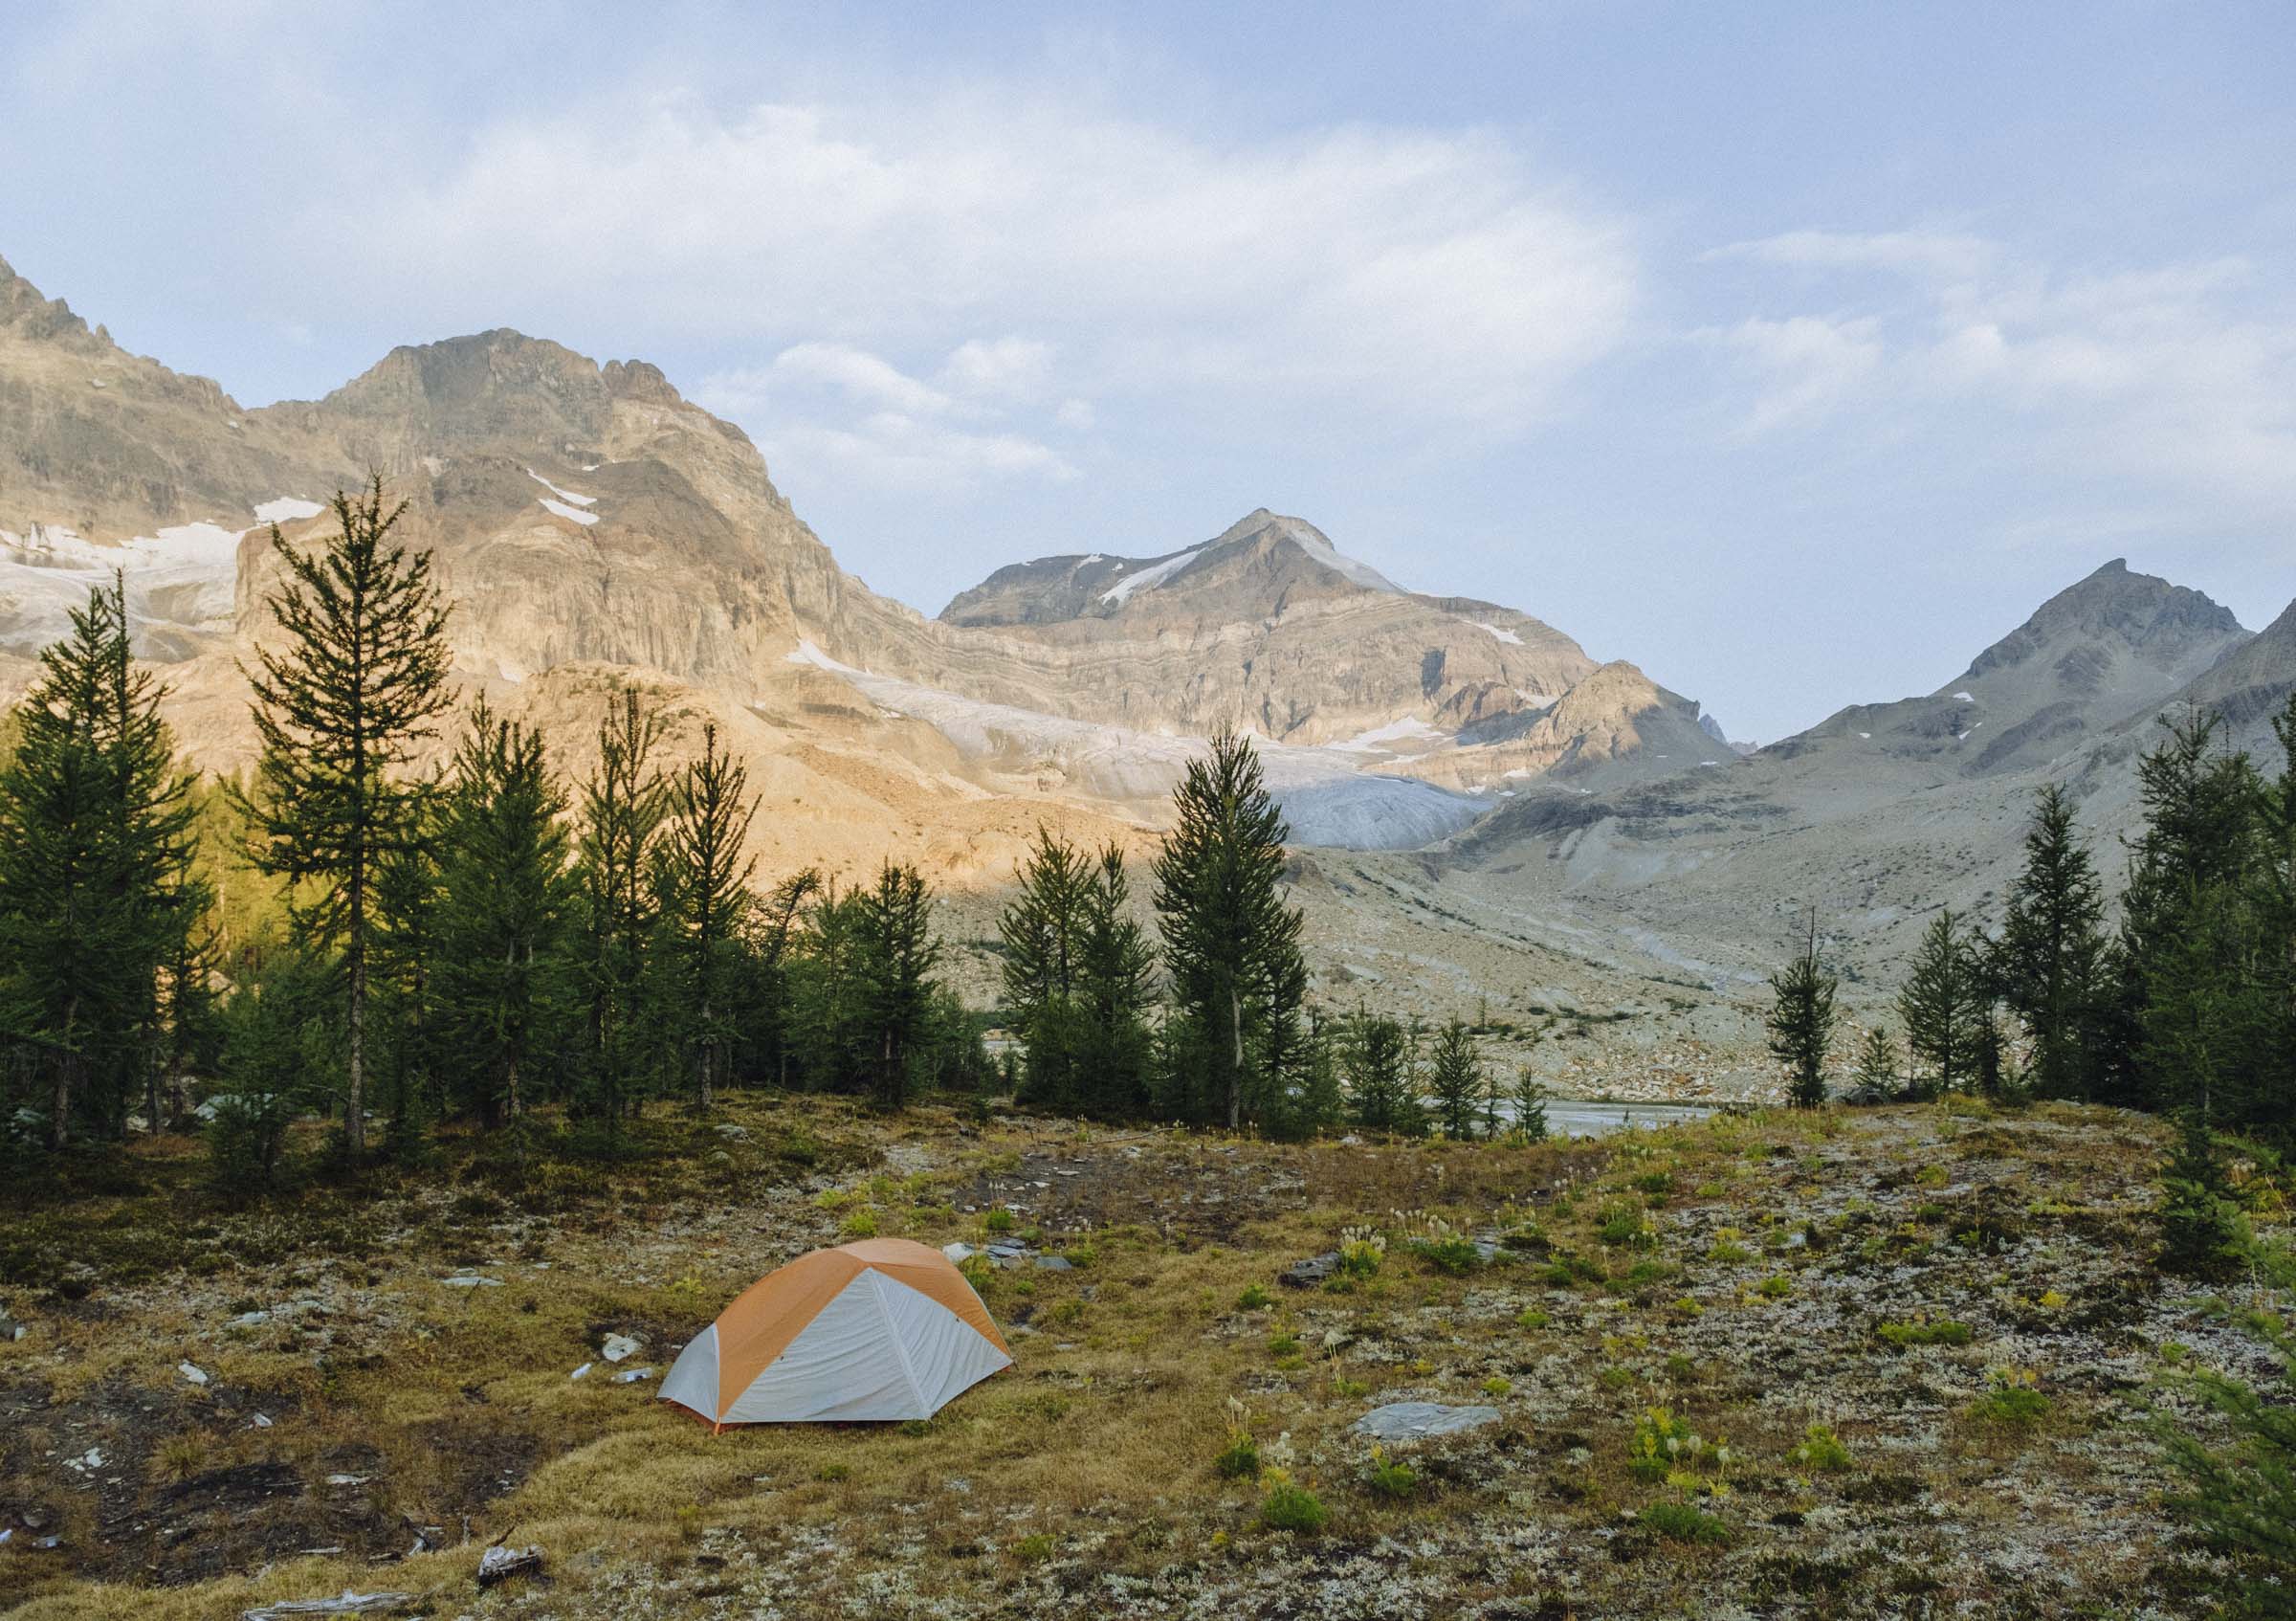 Camping in the Purcell Wilderness